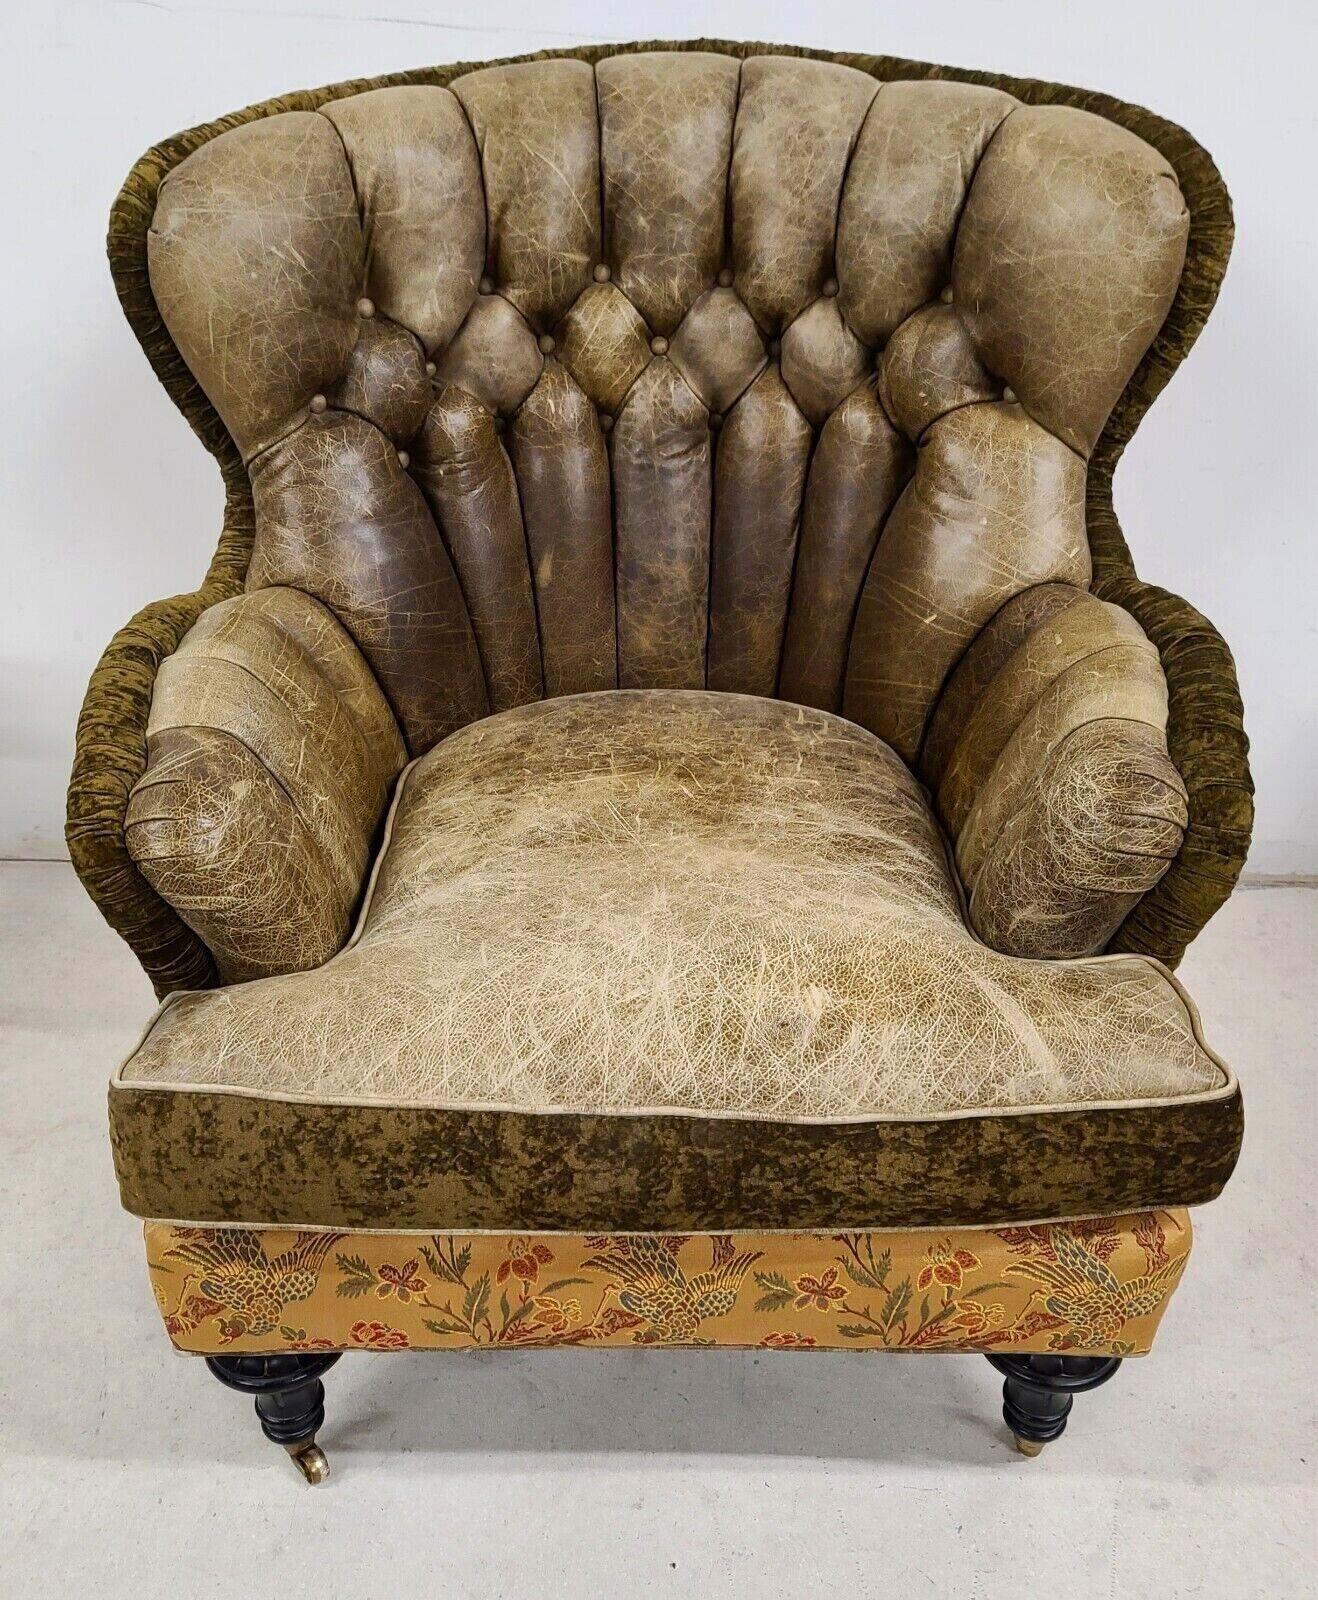 Offering One Of Our Recent Palm Beach Estate Fine Furniture Acquisitions Of A 
Really Stunning Distressed Leather Wingback Library Reading Chair by CAROL HICKS BOLTON for E J VICTOR

Approximate Measurements in Inches
43